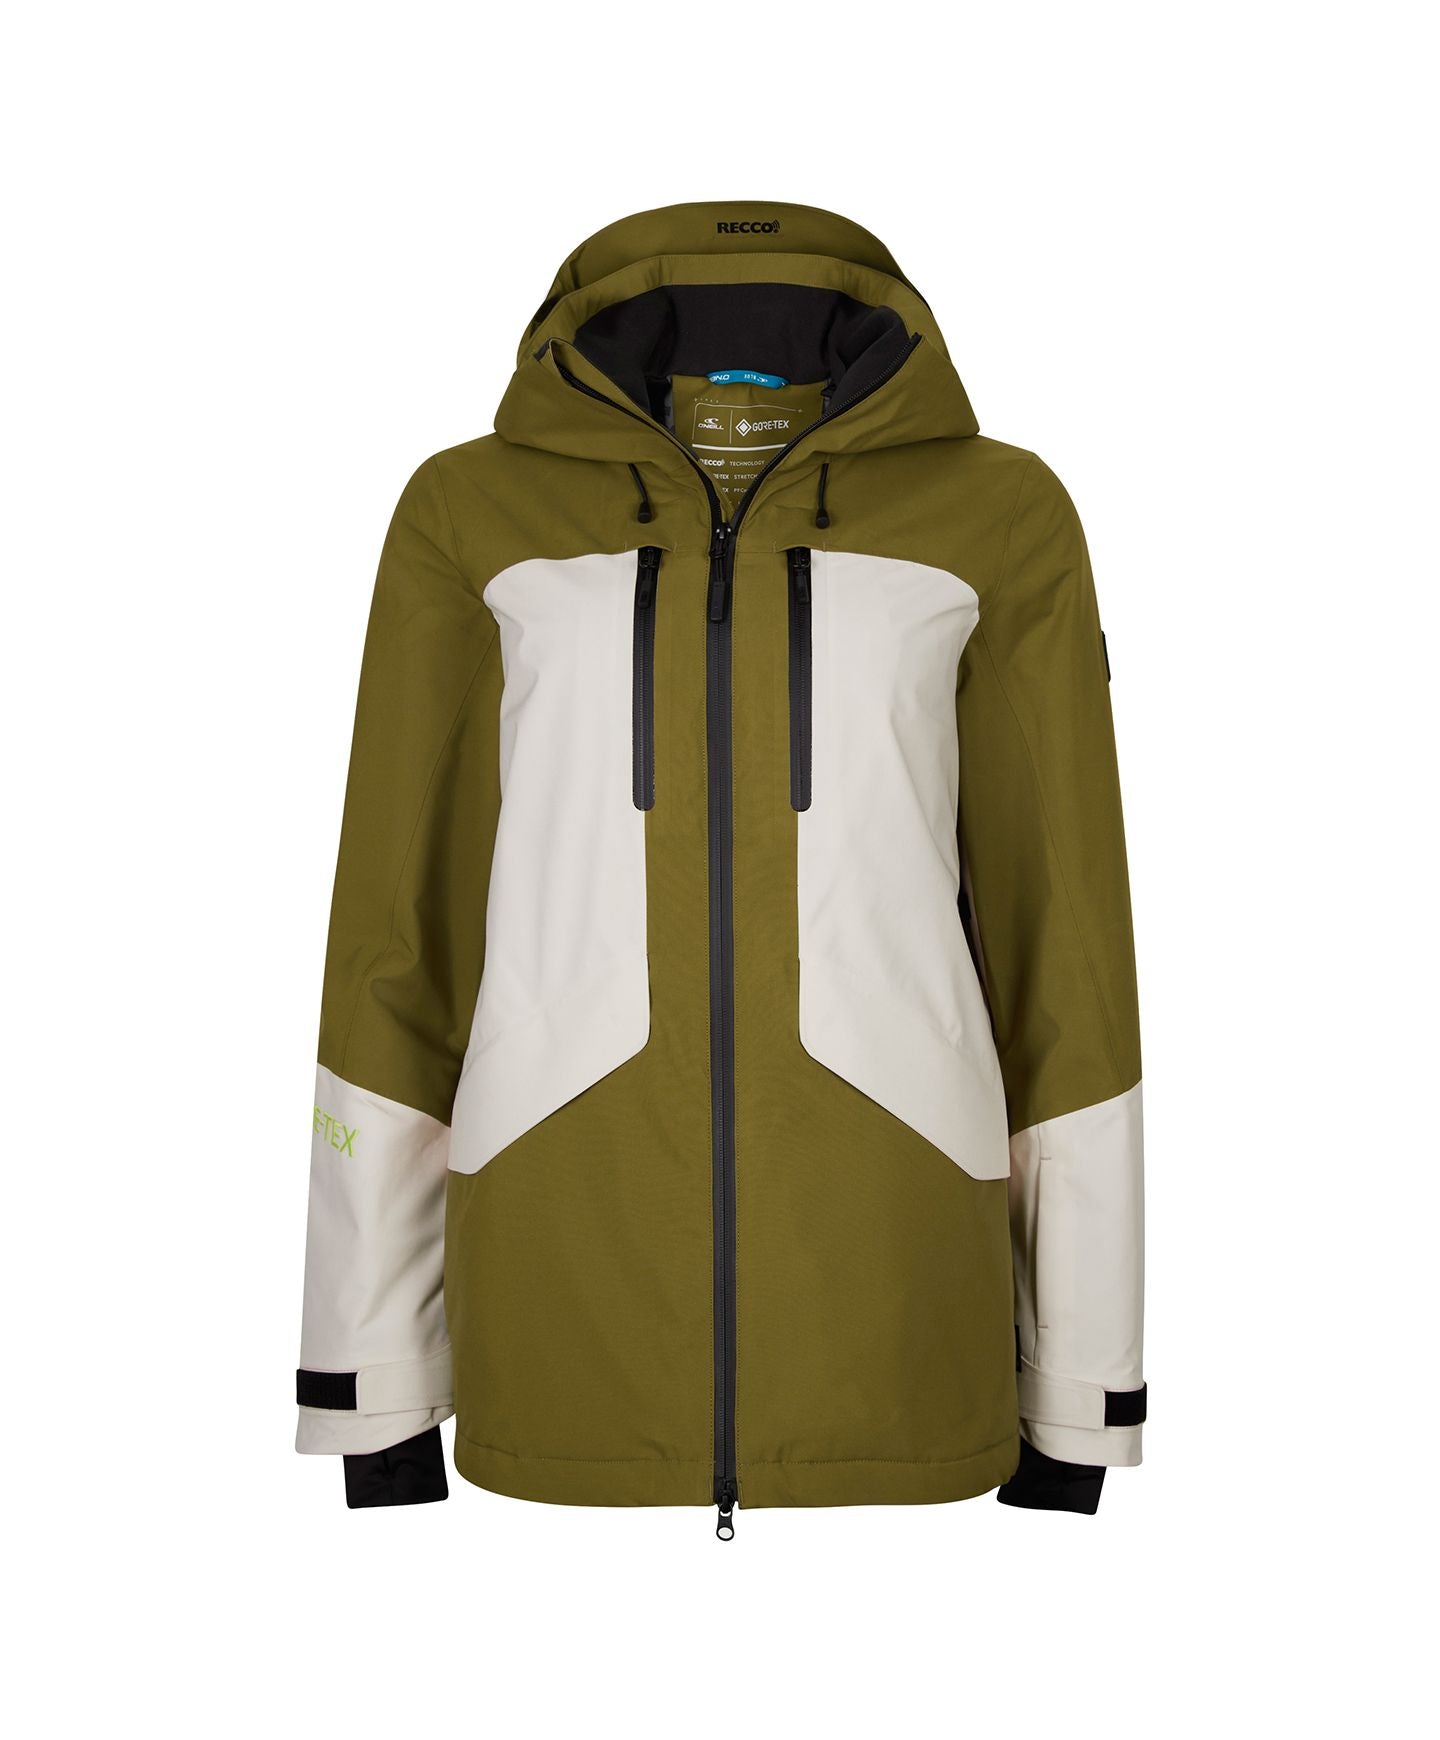 Buy Womens GTX Insulated Snow Jacket - Plantation Colour Block by ONeill online